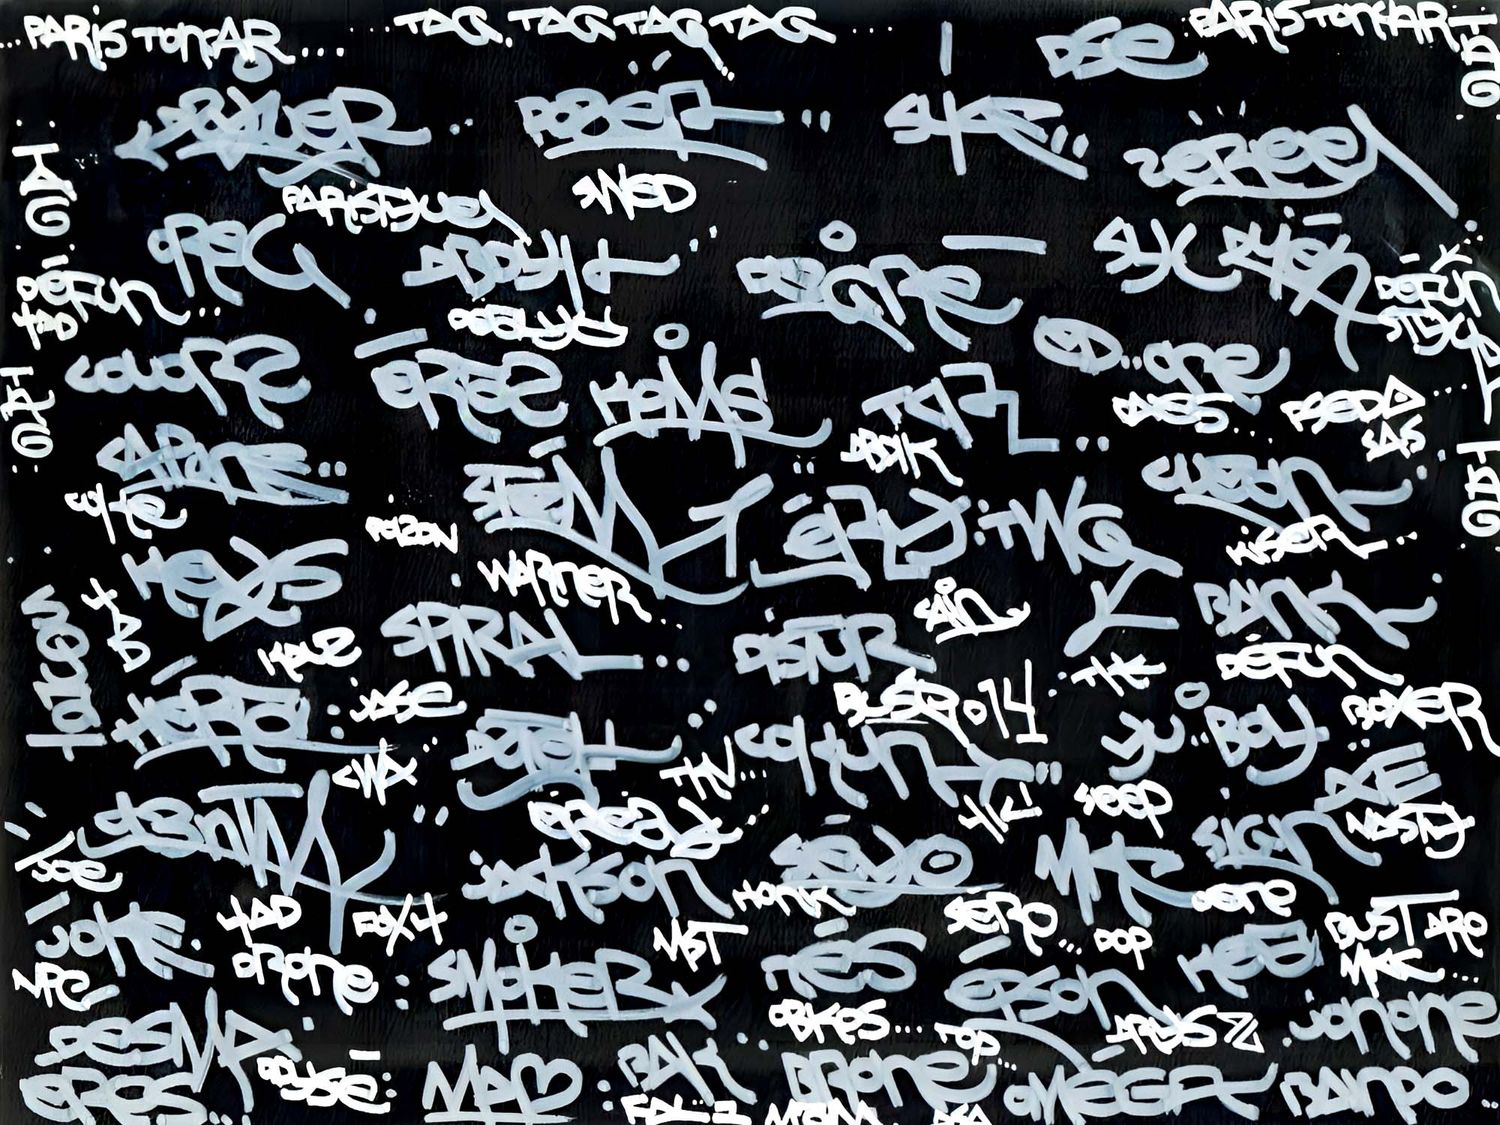 Created by the graffiti artist Defun, this page of tags from the first edition of Paris Tonkar was designed to show the work on letters in using the names of the main actors of this period (©Paris Tonkar).